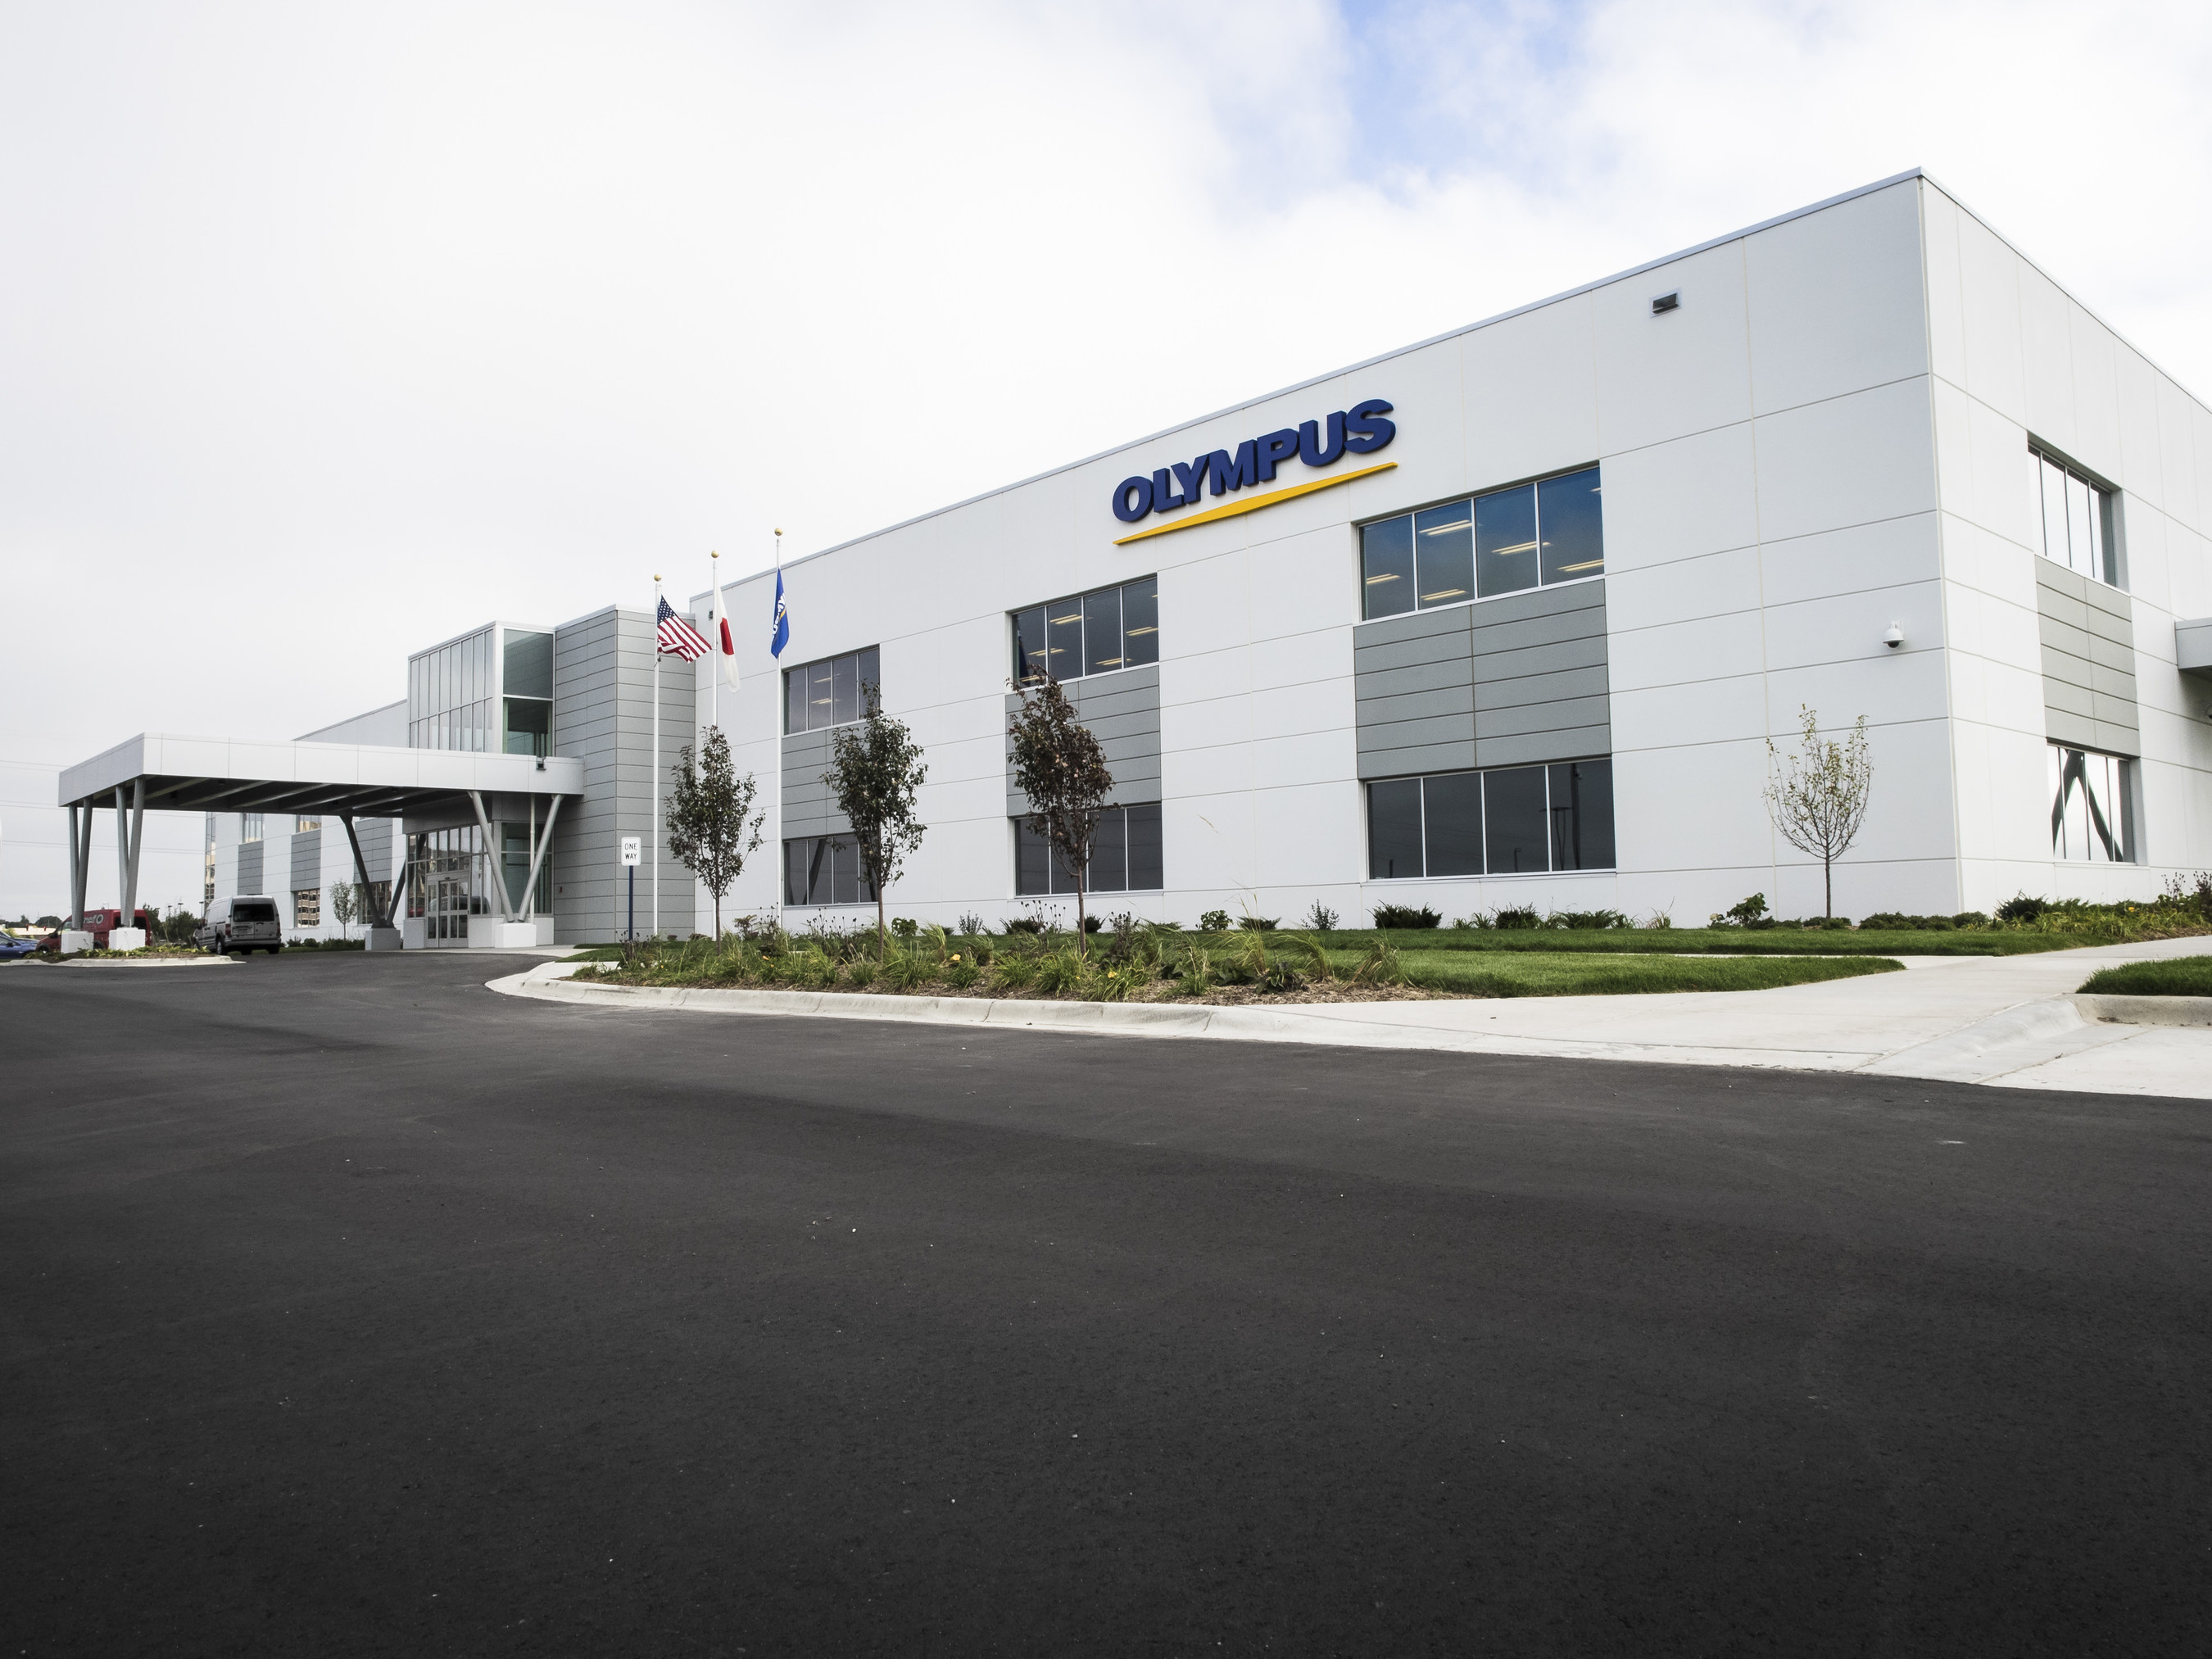 Olympus' new Surgical Innovation Center, located in Brooklyn Park, MN, encompasses more than 180,000 square-feet and is a hub for R&D, manufacturing and training of sophisticated, minimally invasive surgical equipment.